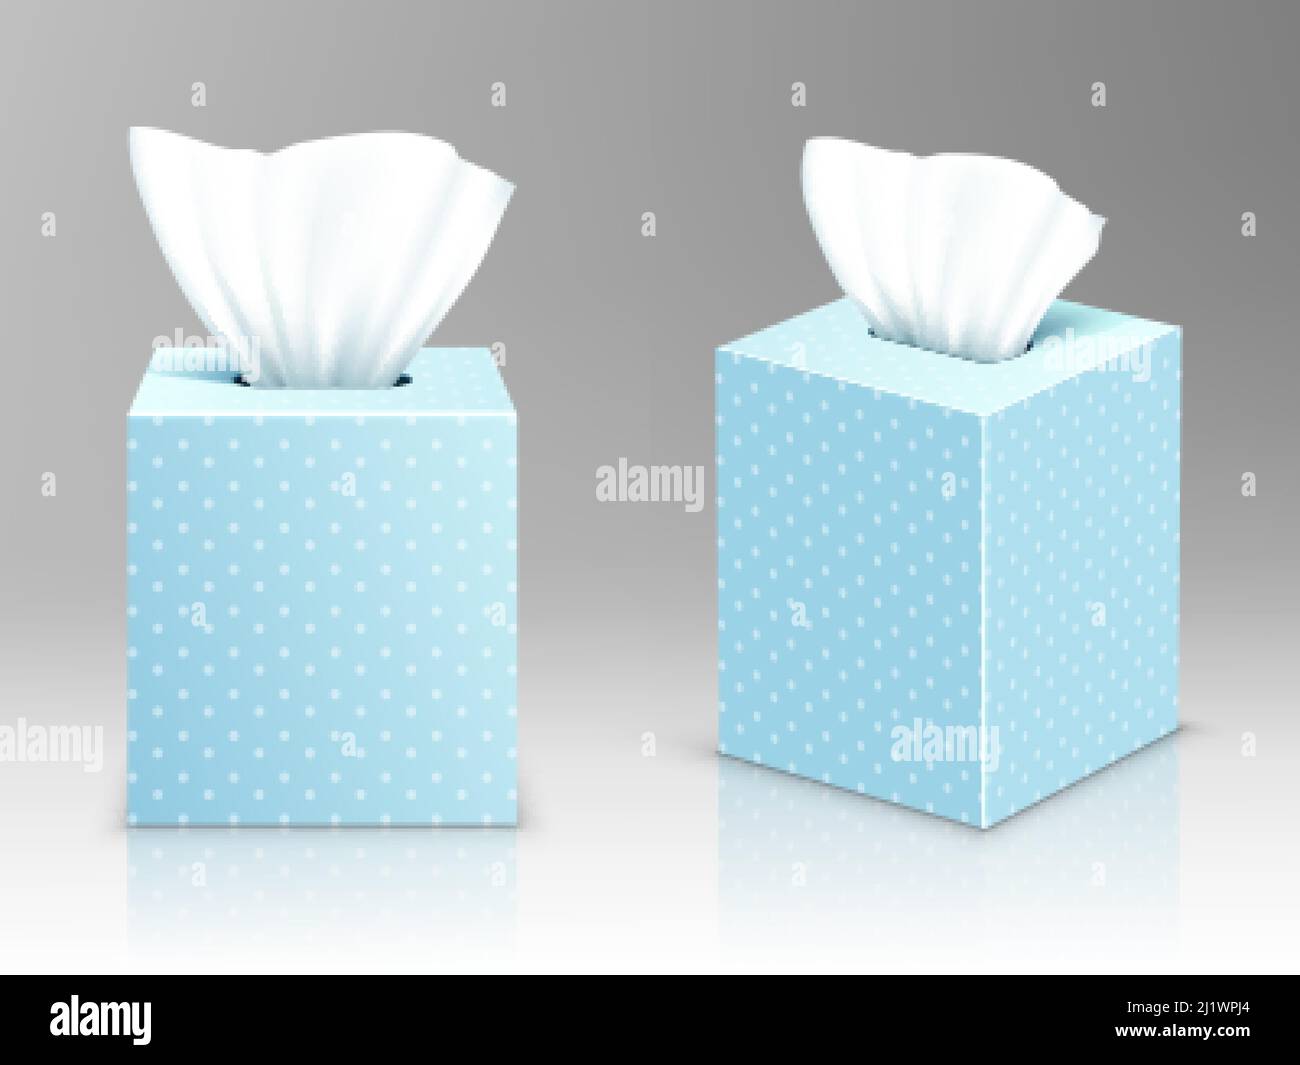 Paper napkin boxes, open packages with tissue wipes front and side view. Hygiene accessories, blue carton packages with polka dots pattern isolated on Stock Vector